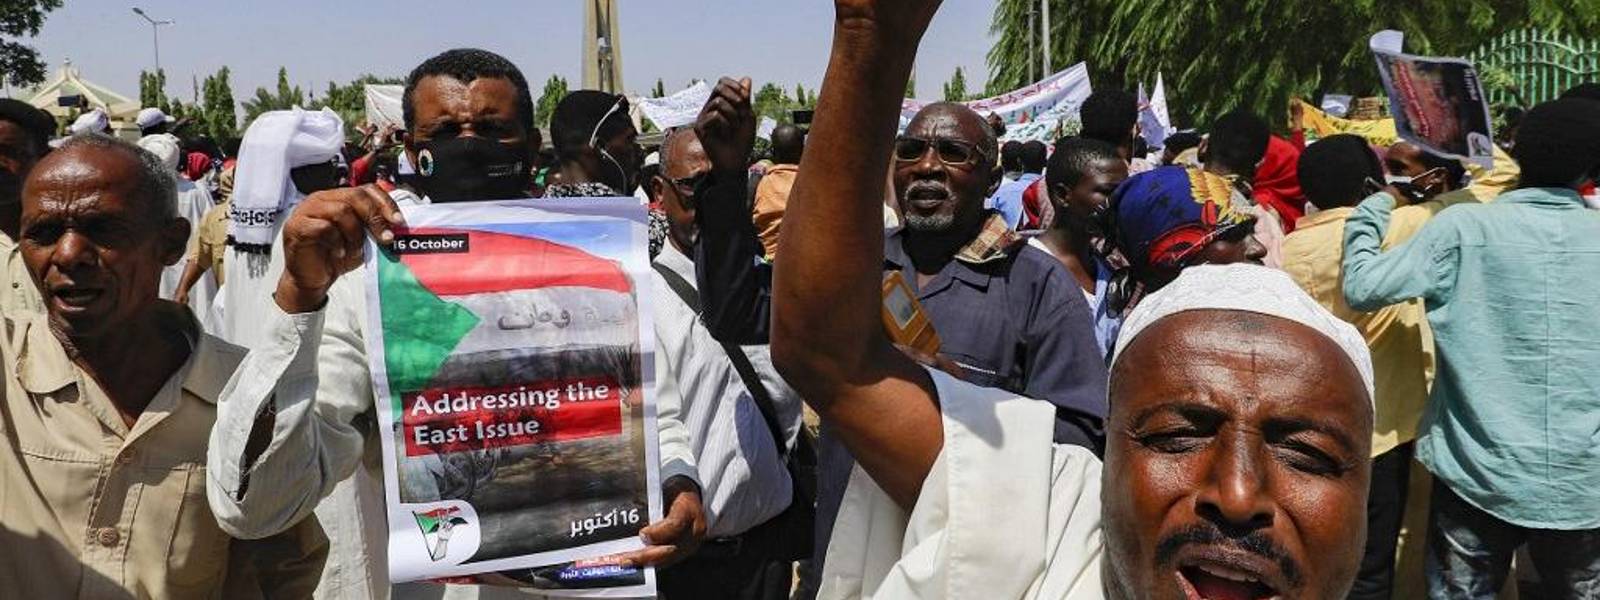 Sudanese gear up for nationwide protests against military coup